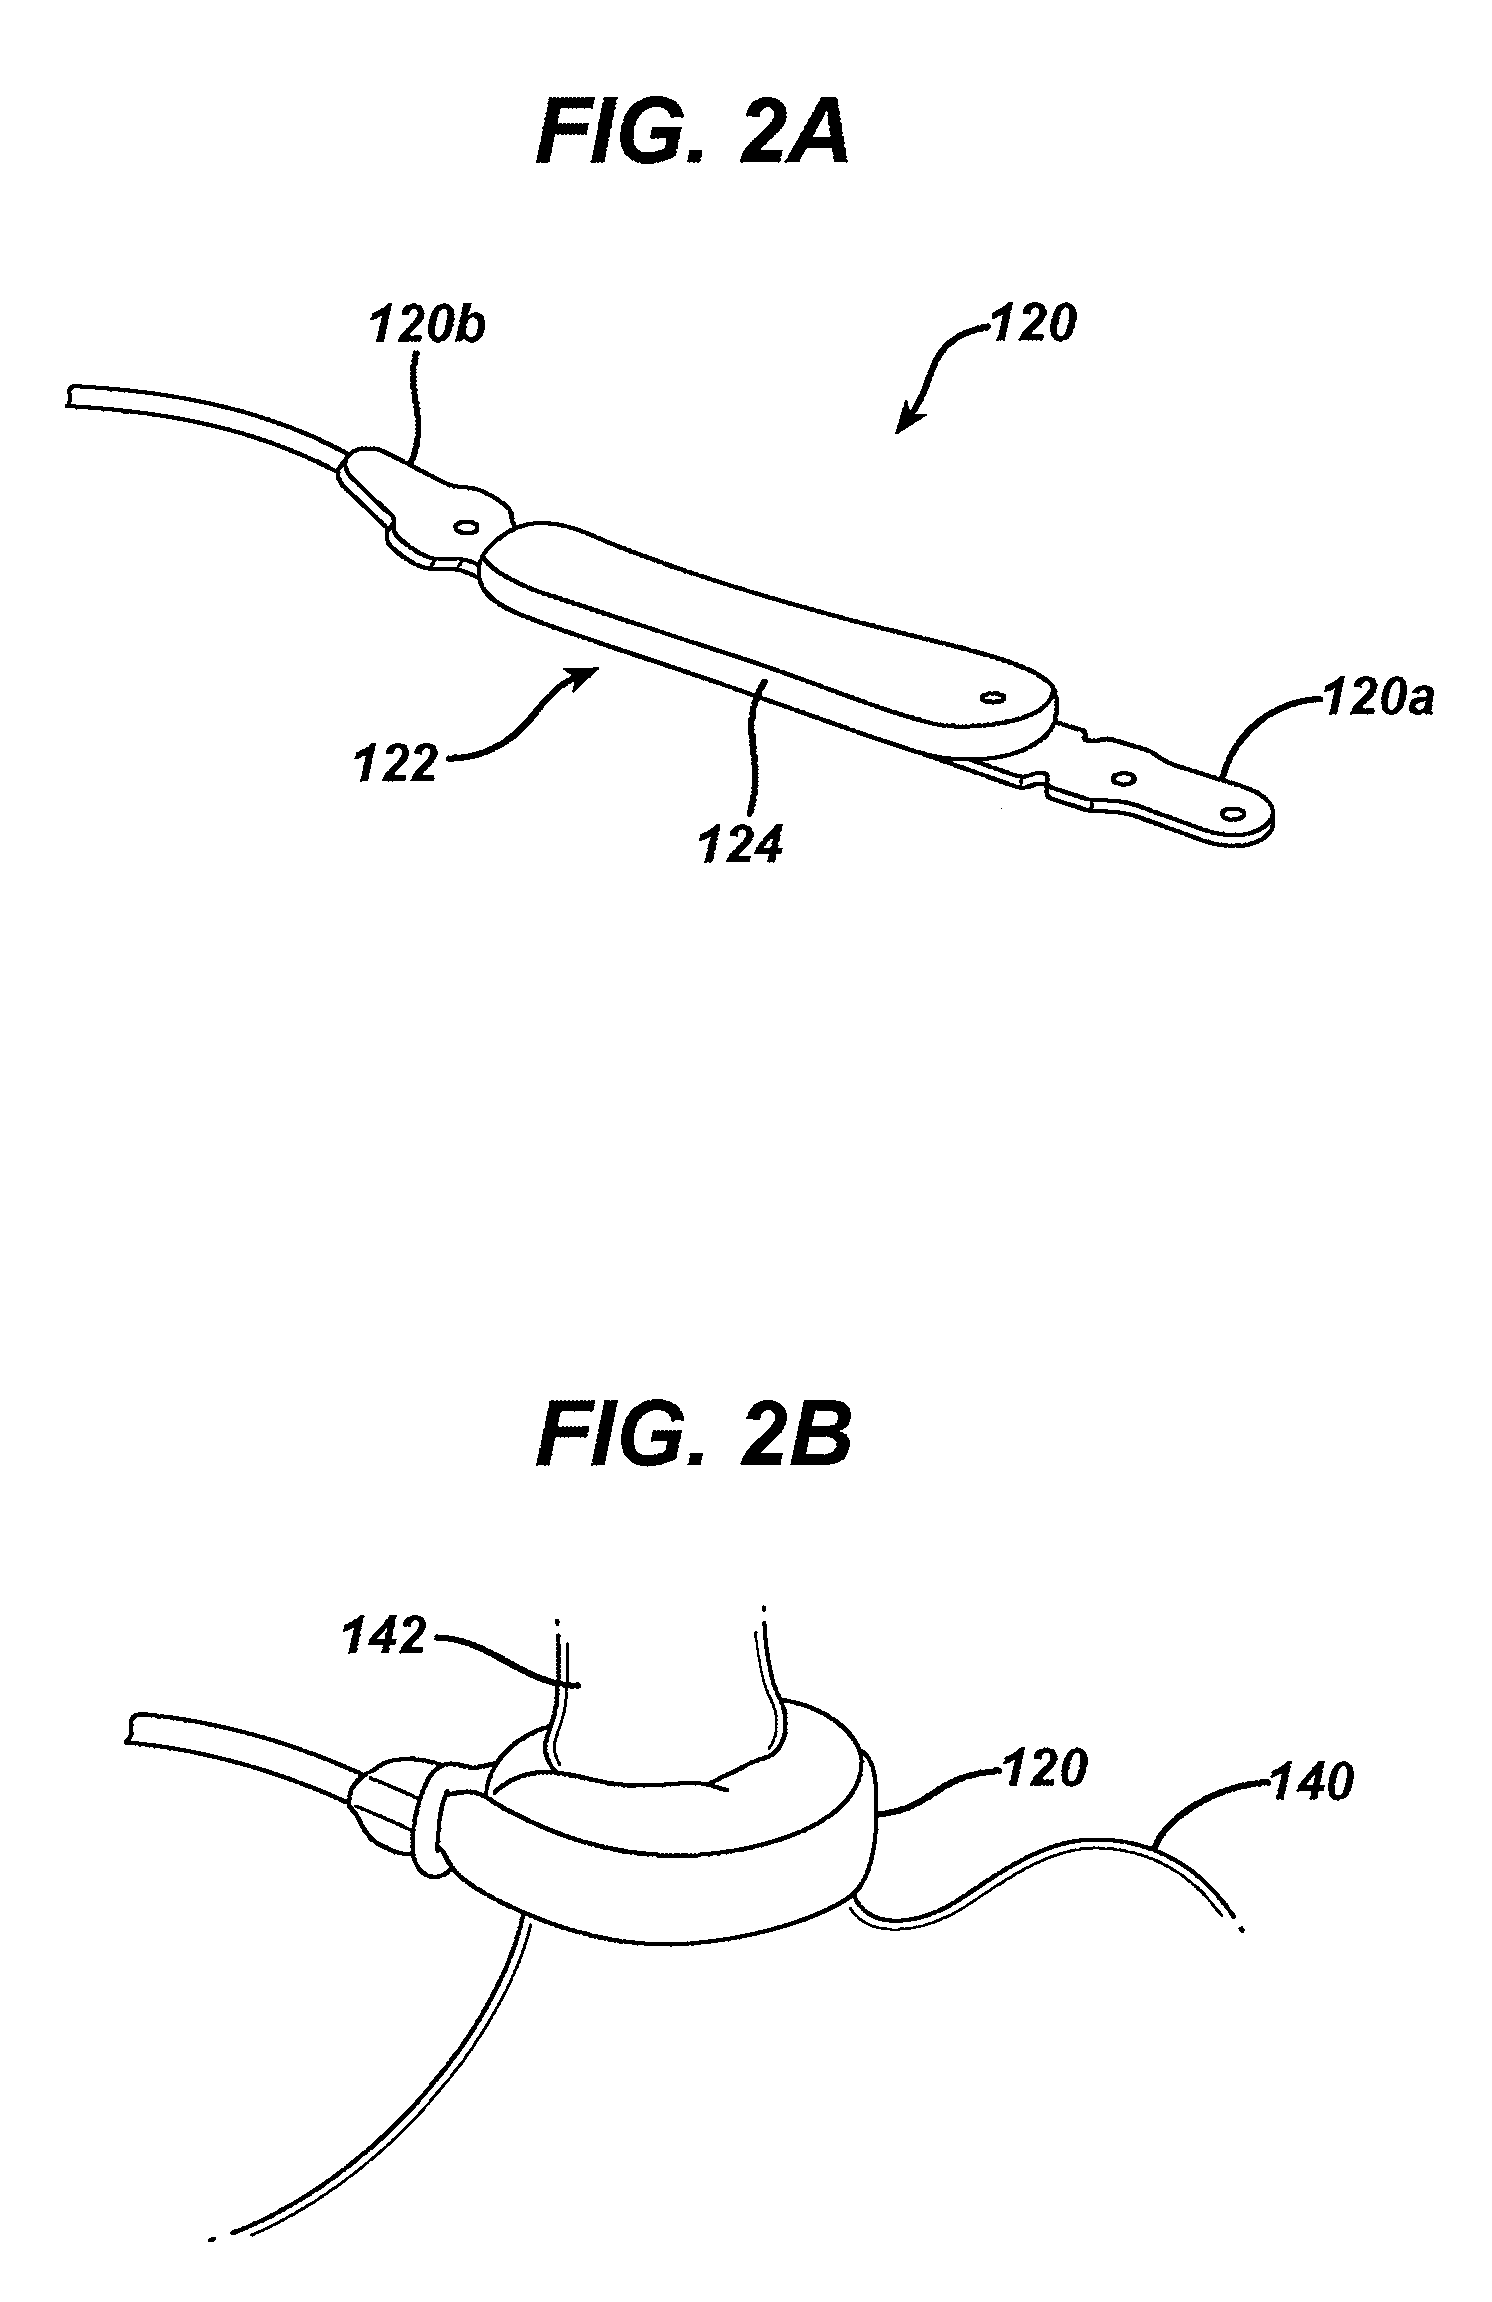 Controlling pressure in adjustable restriction devices